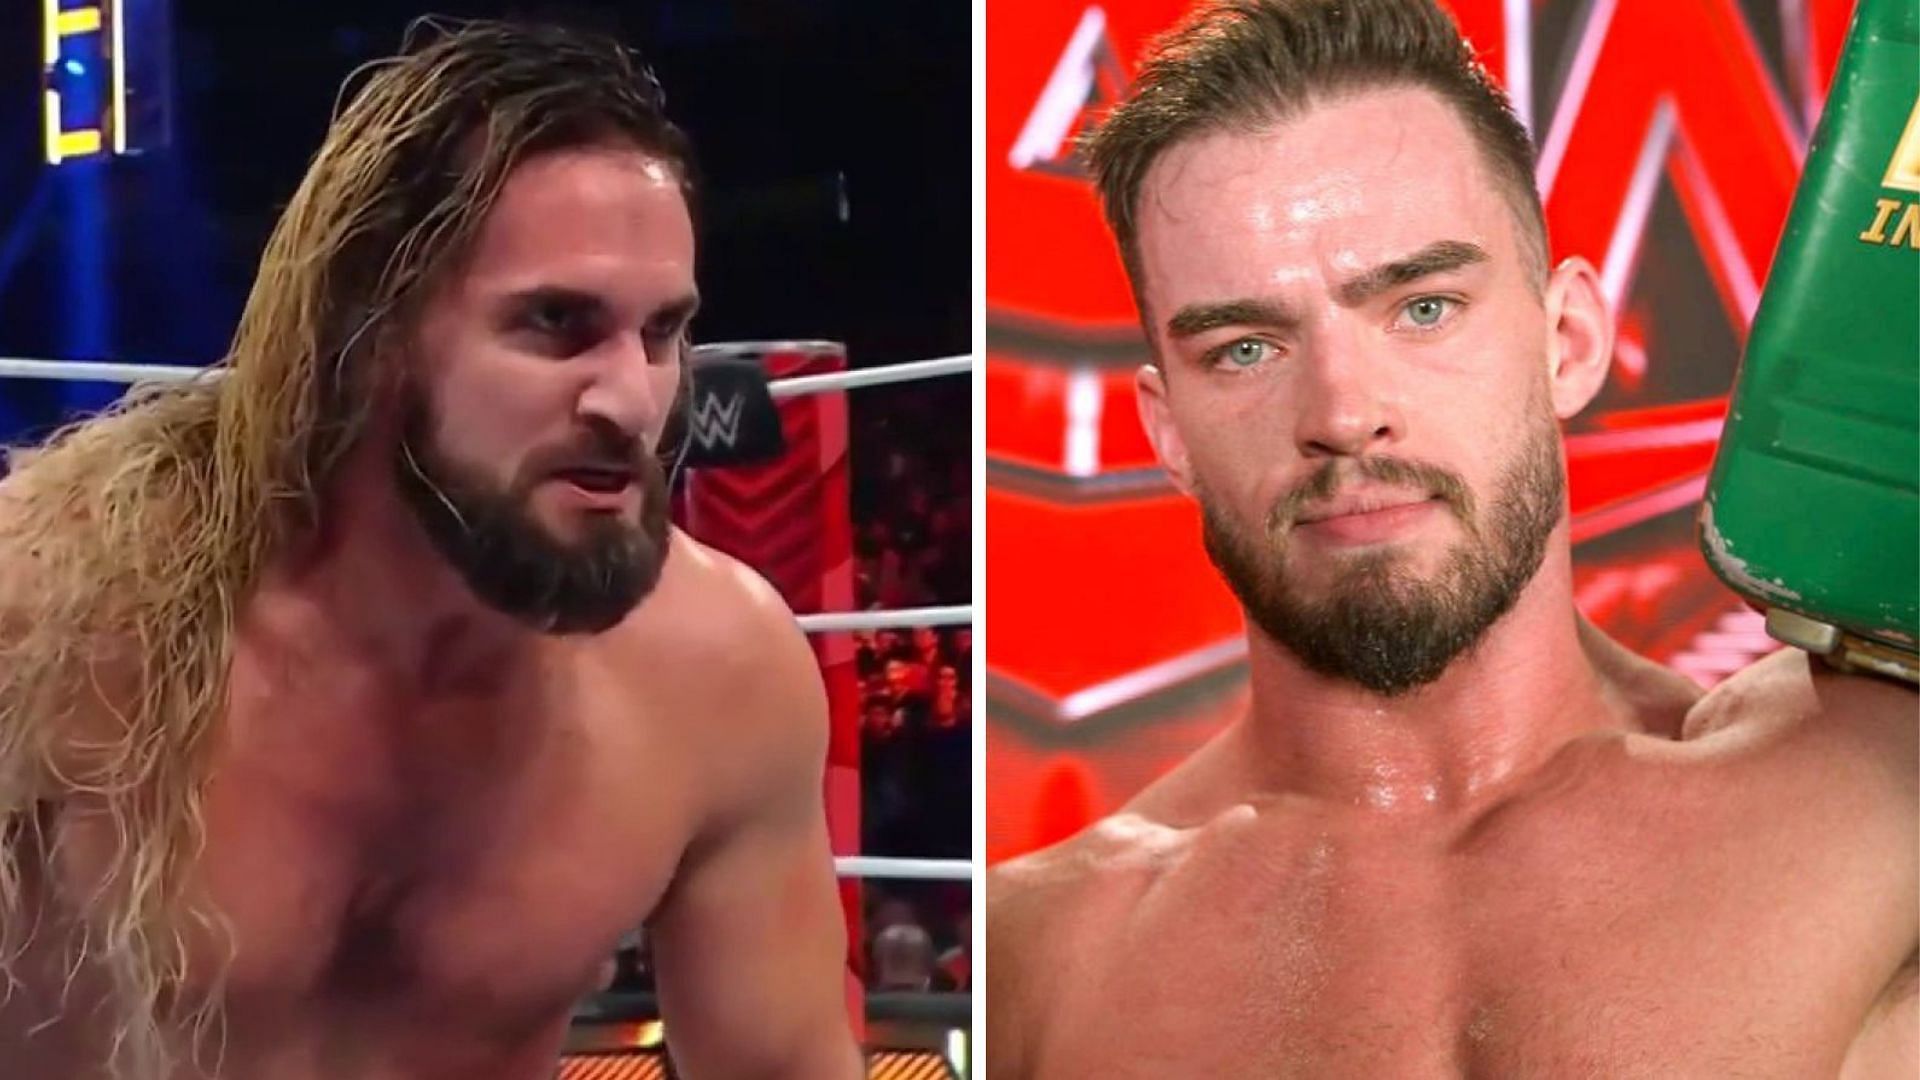 Seth Rollins squared off against Austin Theory this week on WWE RAW